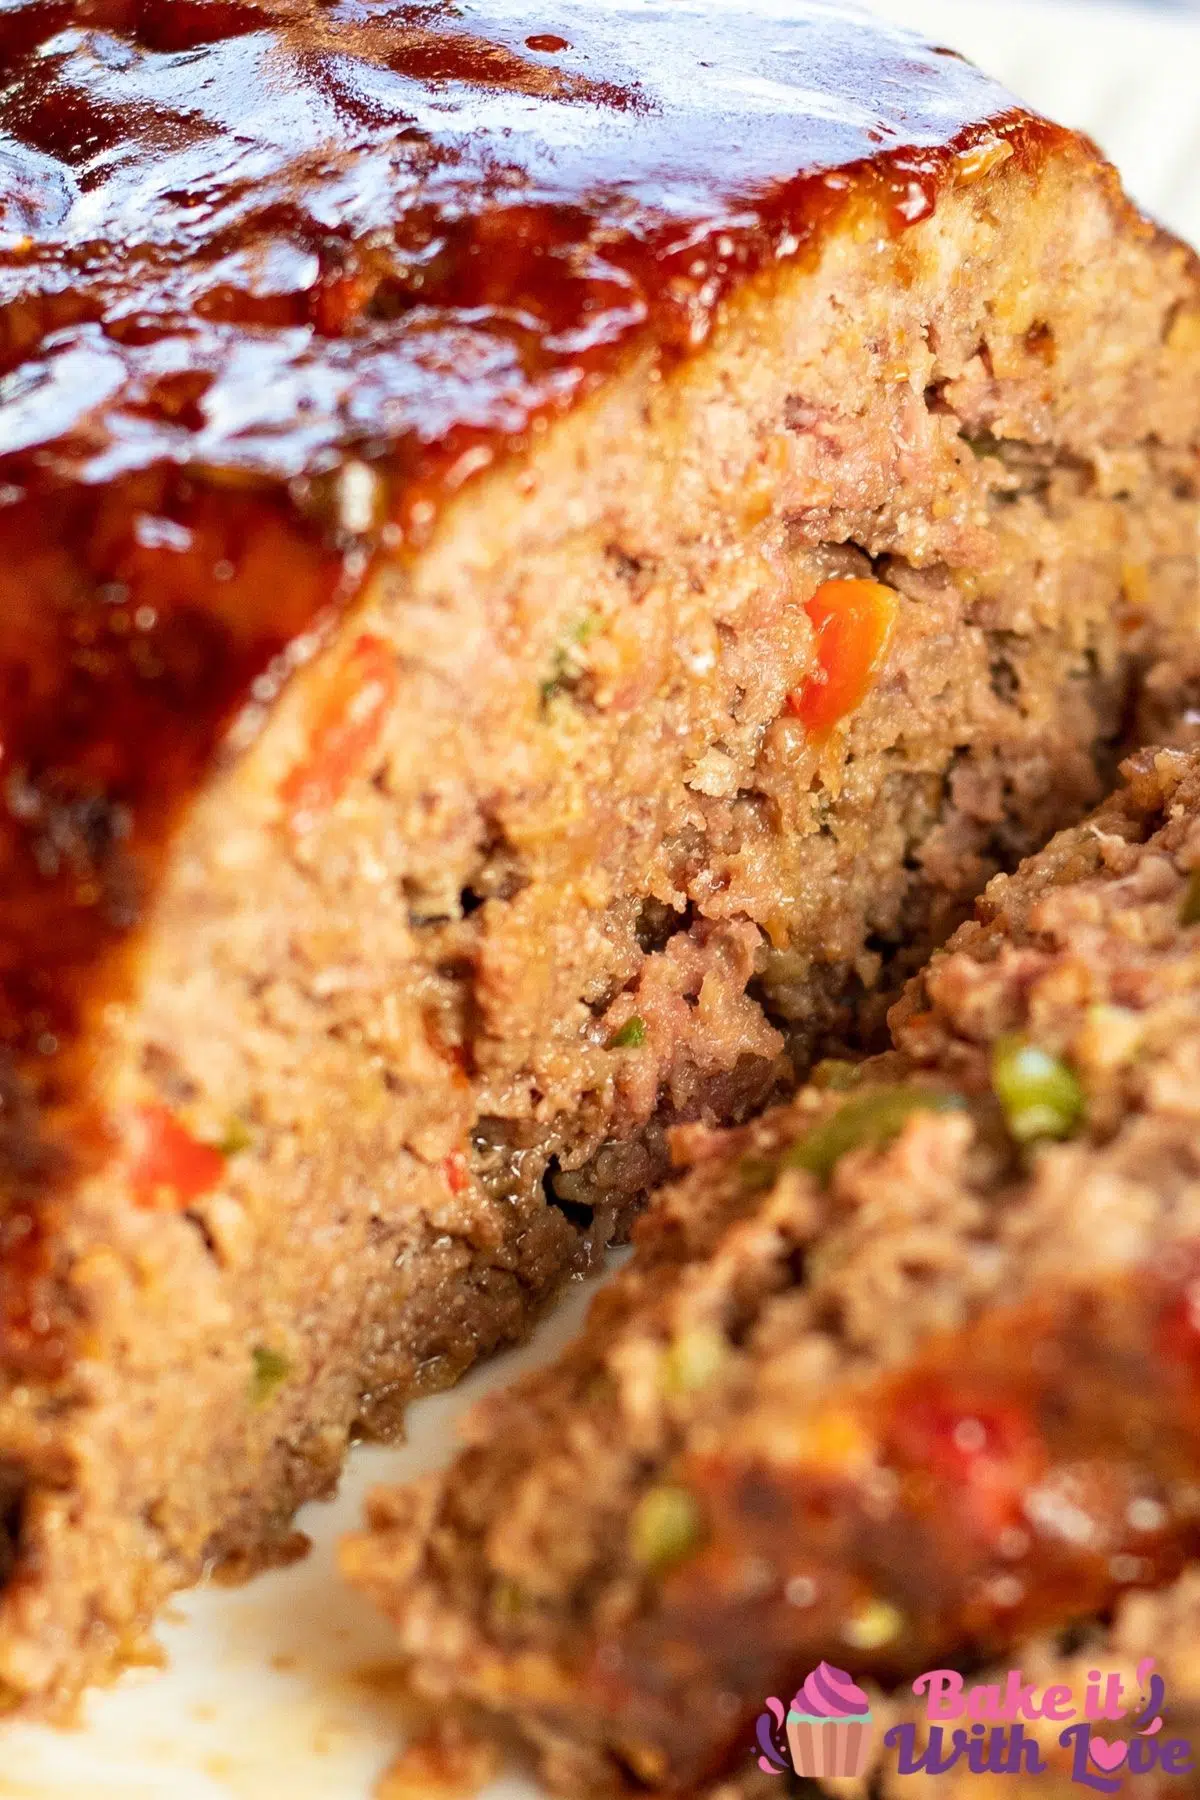 Tall closeup of the sliced sweet and sour meatloaf.